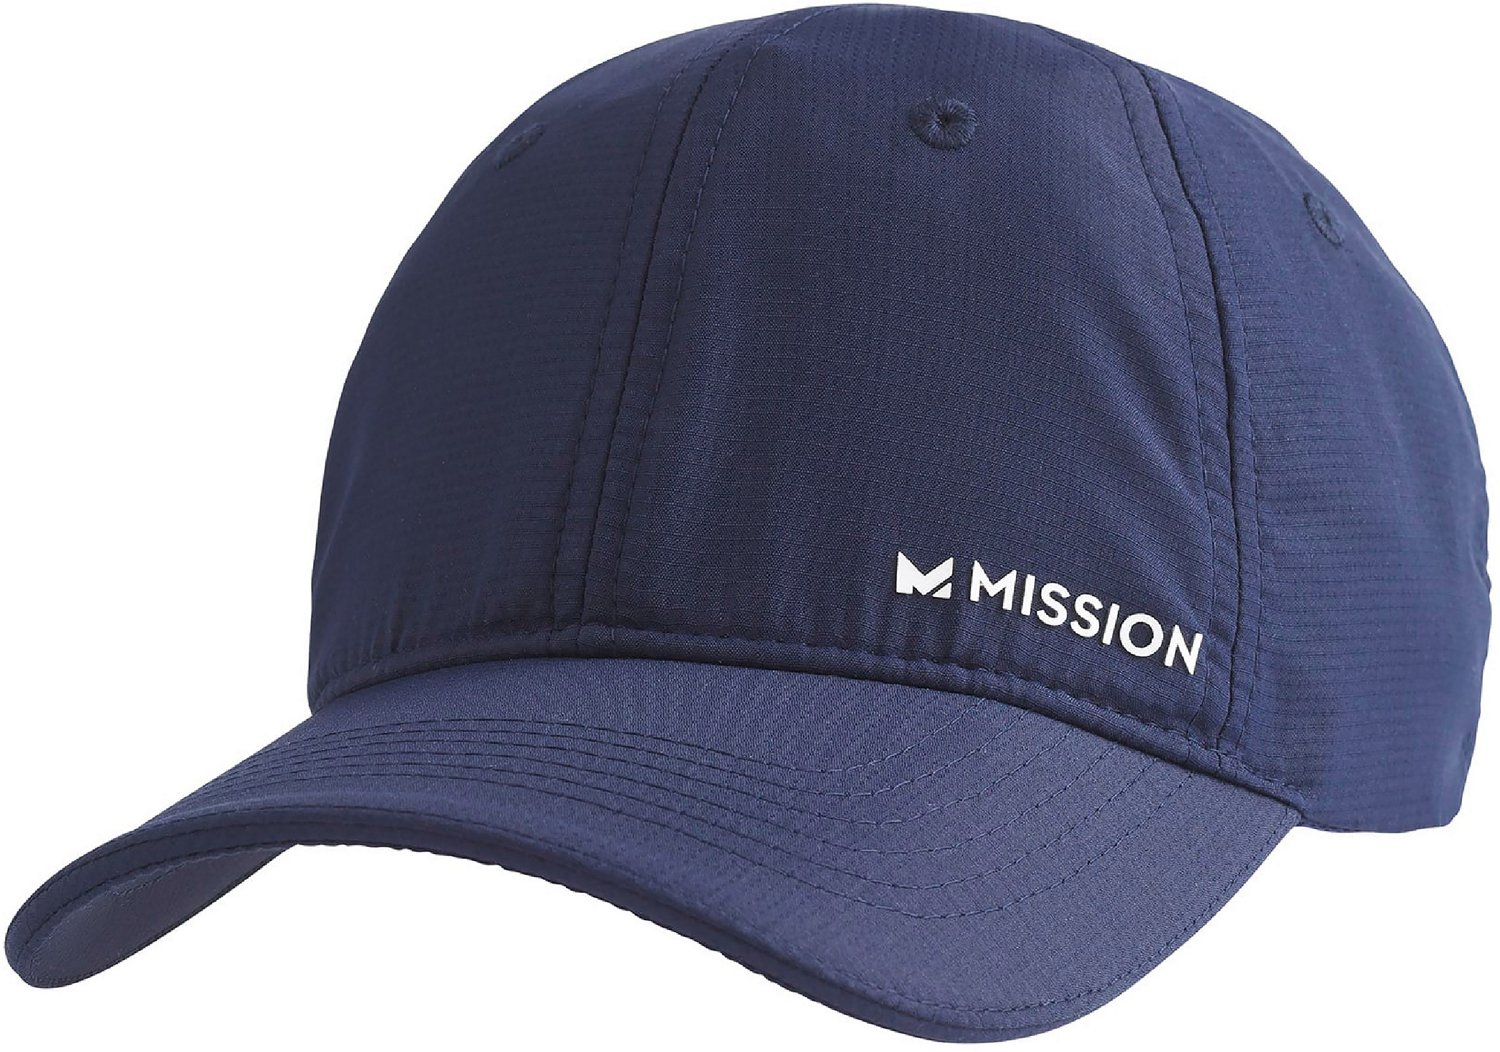 MISSION Adults' Instant Cooling Performance Hat